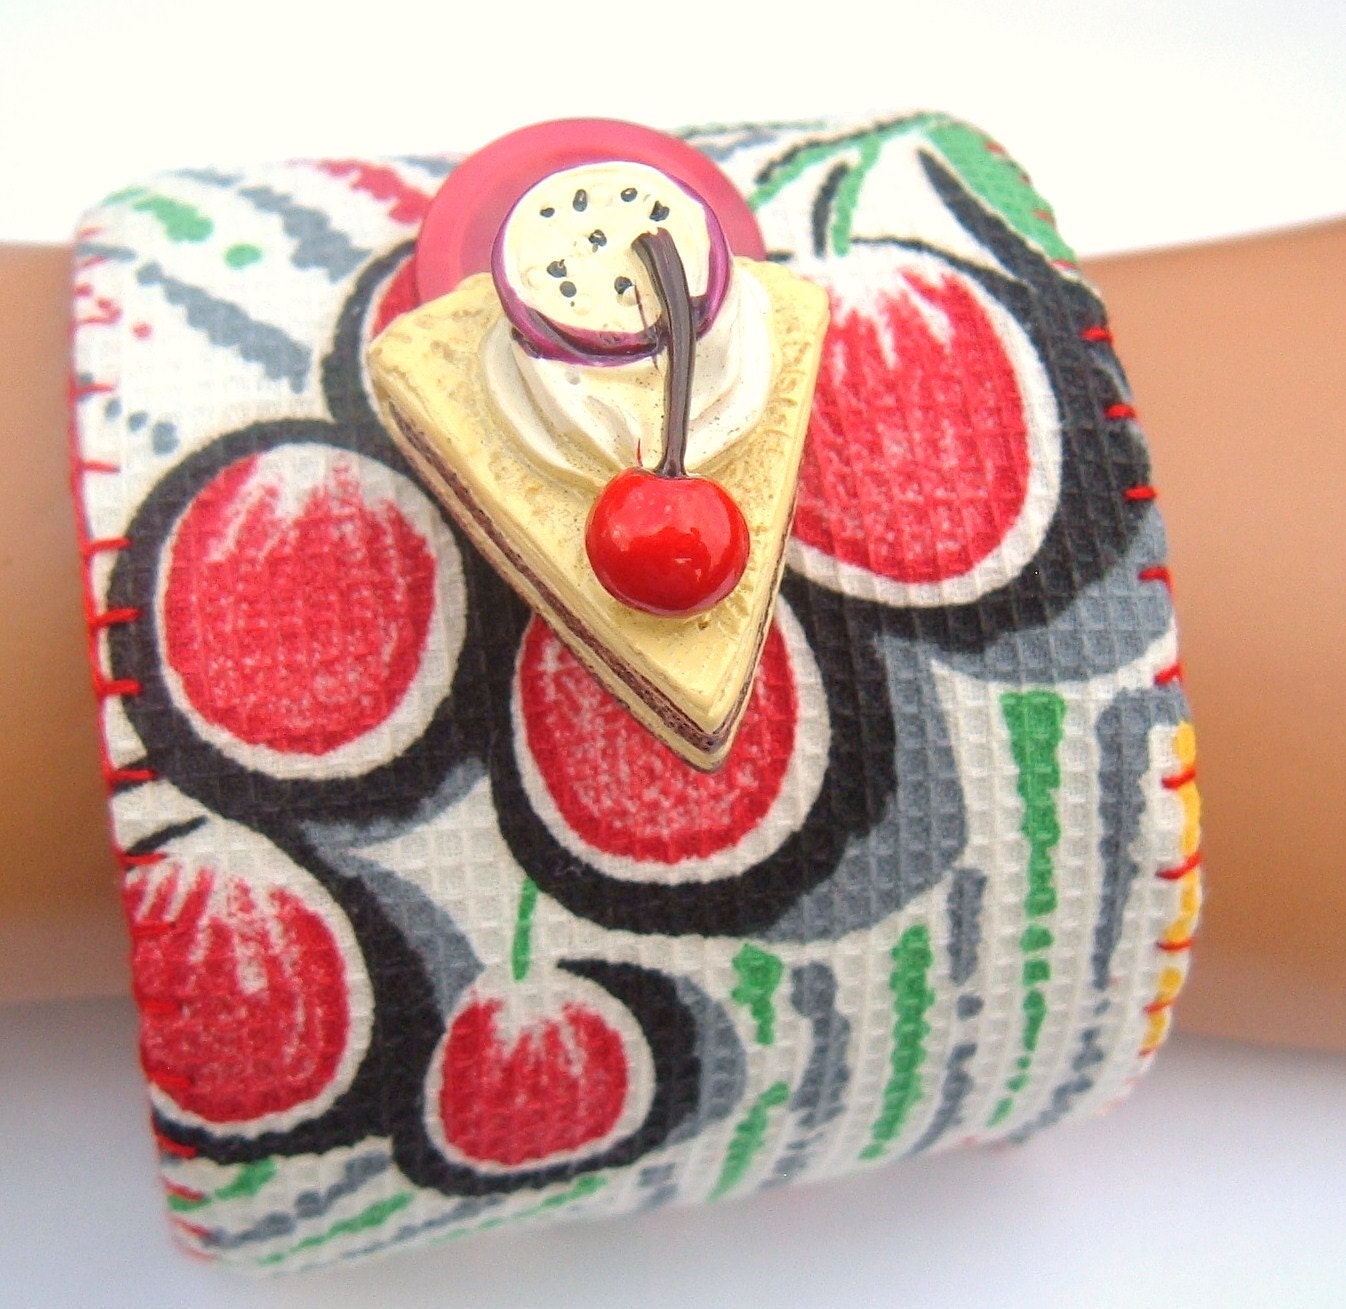 Red Grapes and Cherry Pie Fabric cuff Bracelet vintage recycle